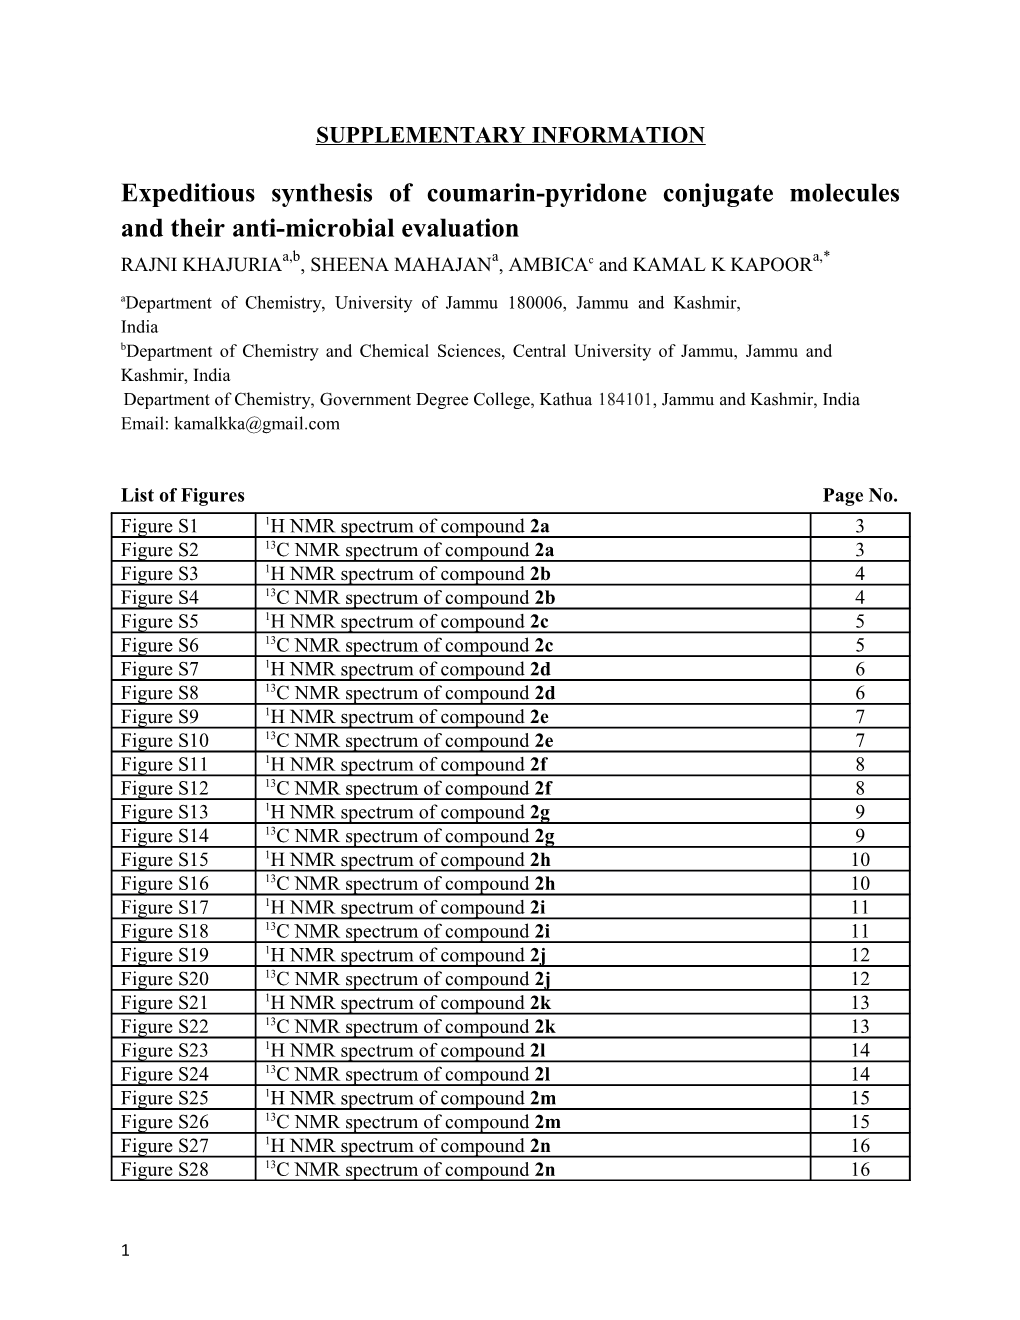 Expeditious Synthesis of Coumarin-Pyridone Conjugate Molecules and Their Anti-Microbial